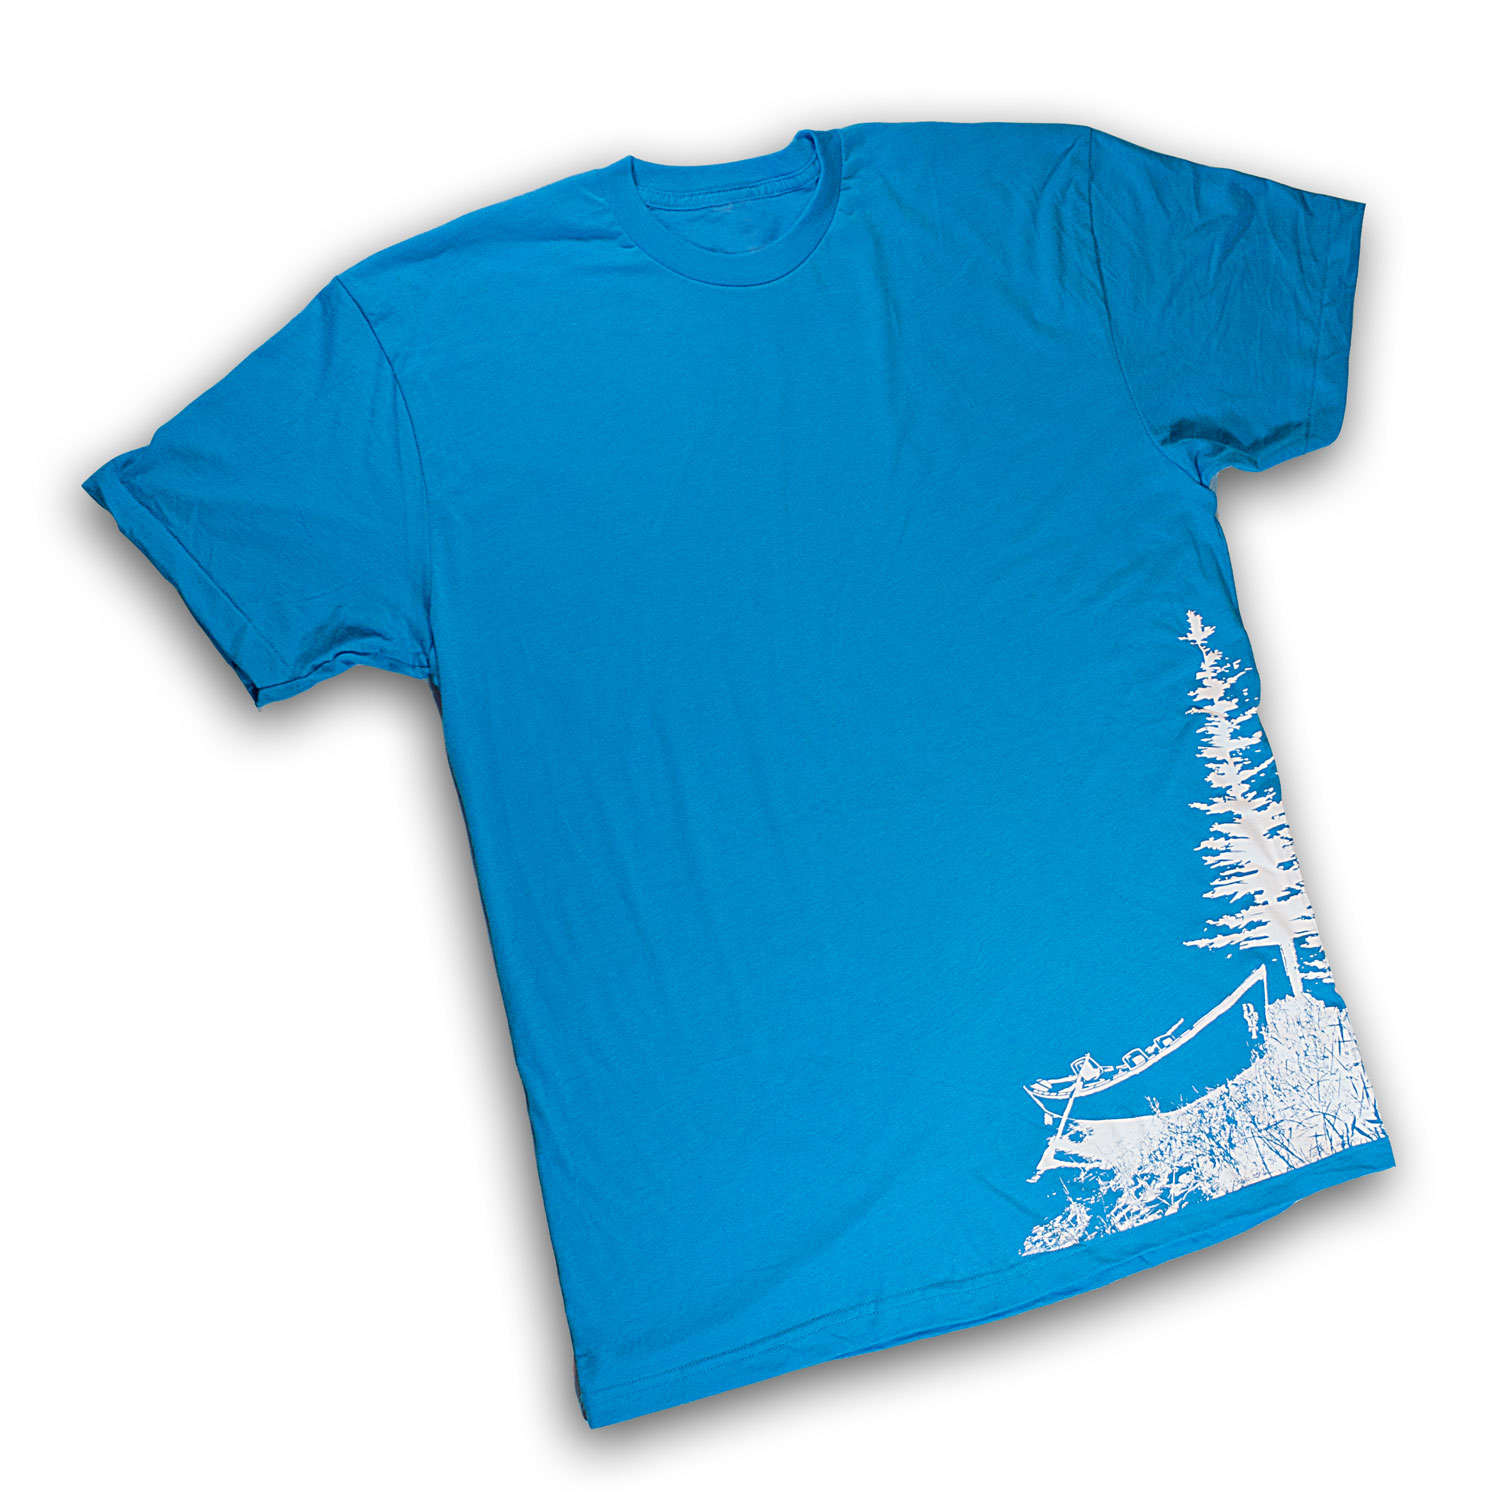 DRYFT Boat Tee Remix blue - front